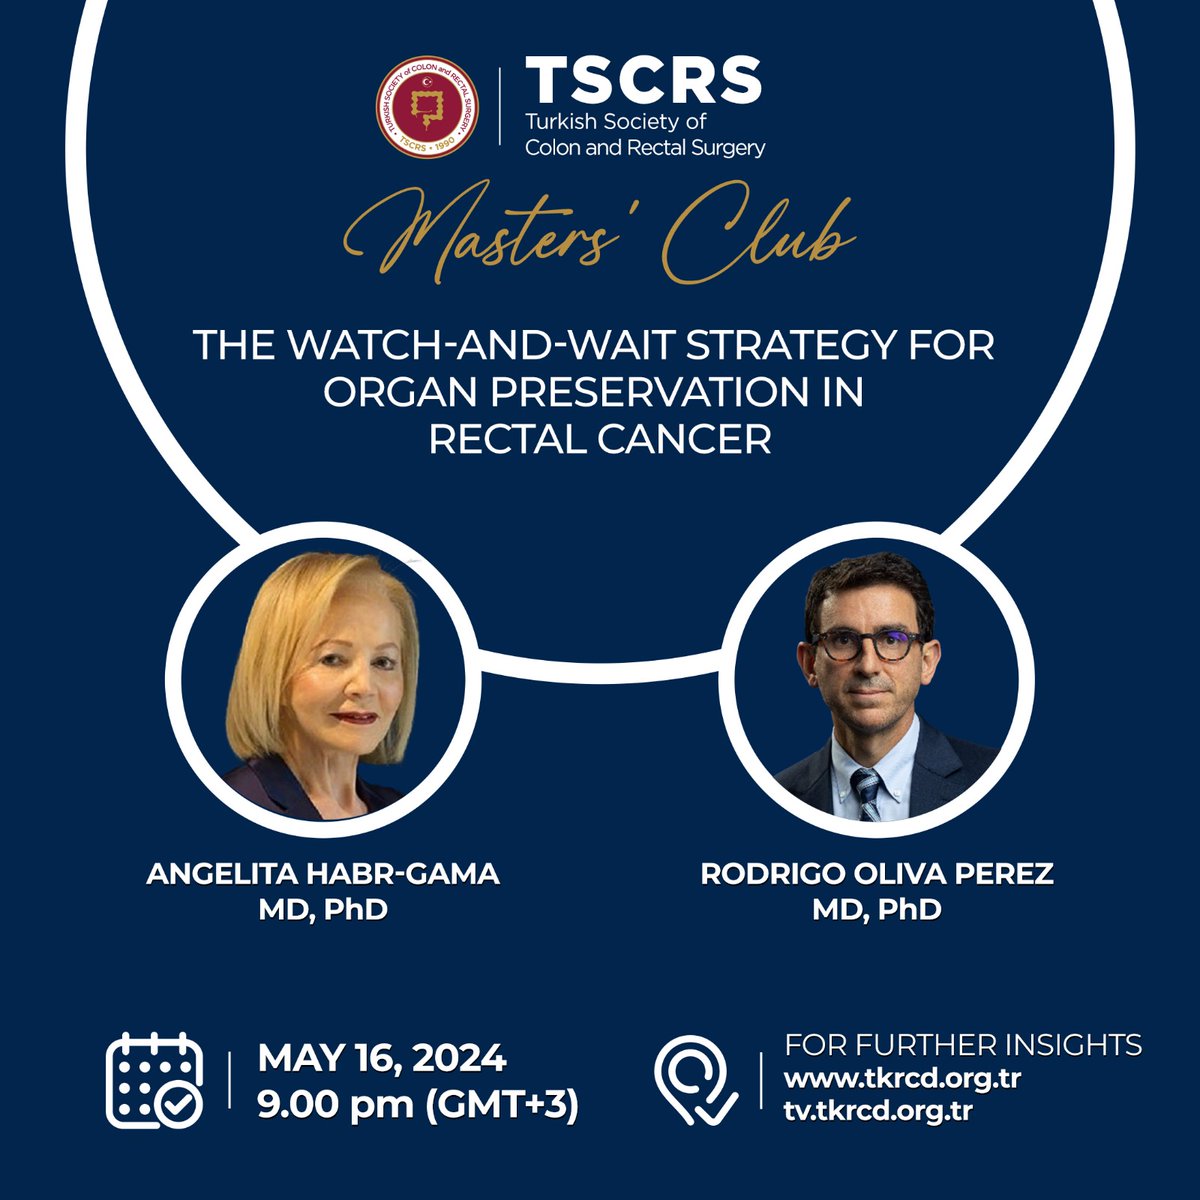 📢We are excited to announce the next session in our 'Masters' Club' series, hosted by the Turkish Society of Colon and Rectal Surgery! ✅Join us for an enlightening discussion on the innovative 'Watch-and-Wait' approach to rectal cancer treatment with world-renowned surgeons